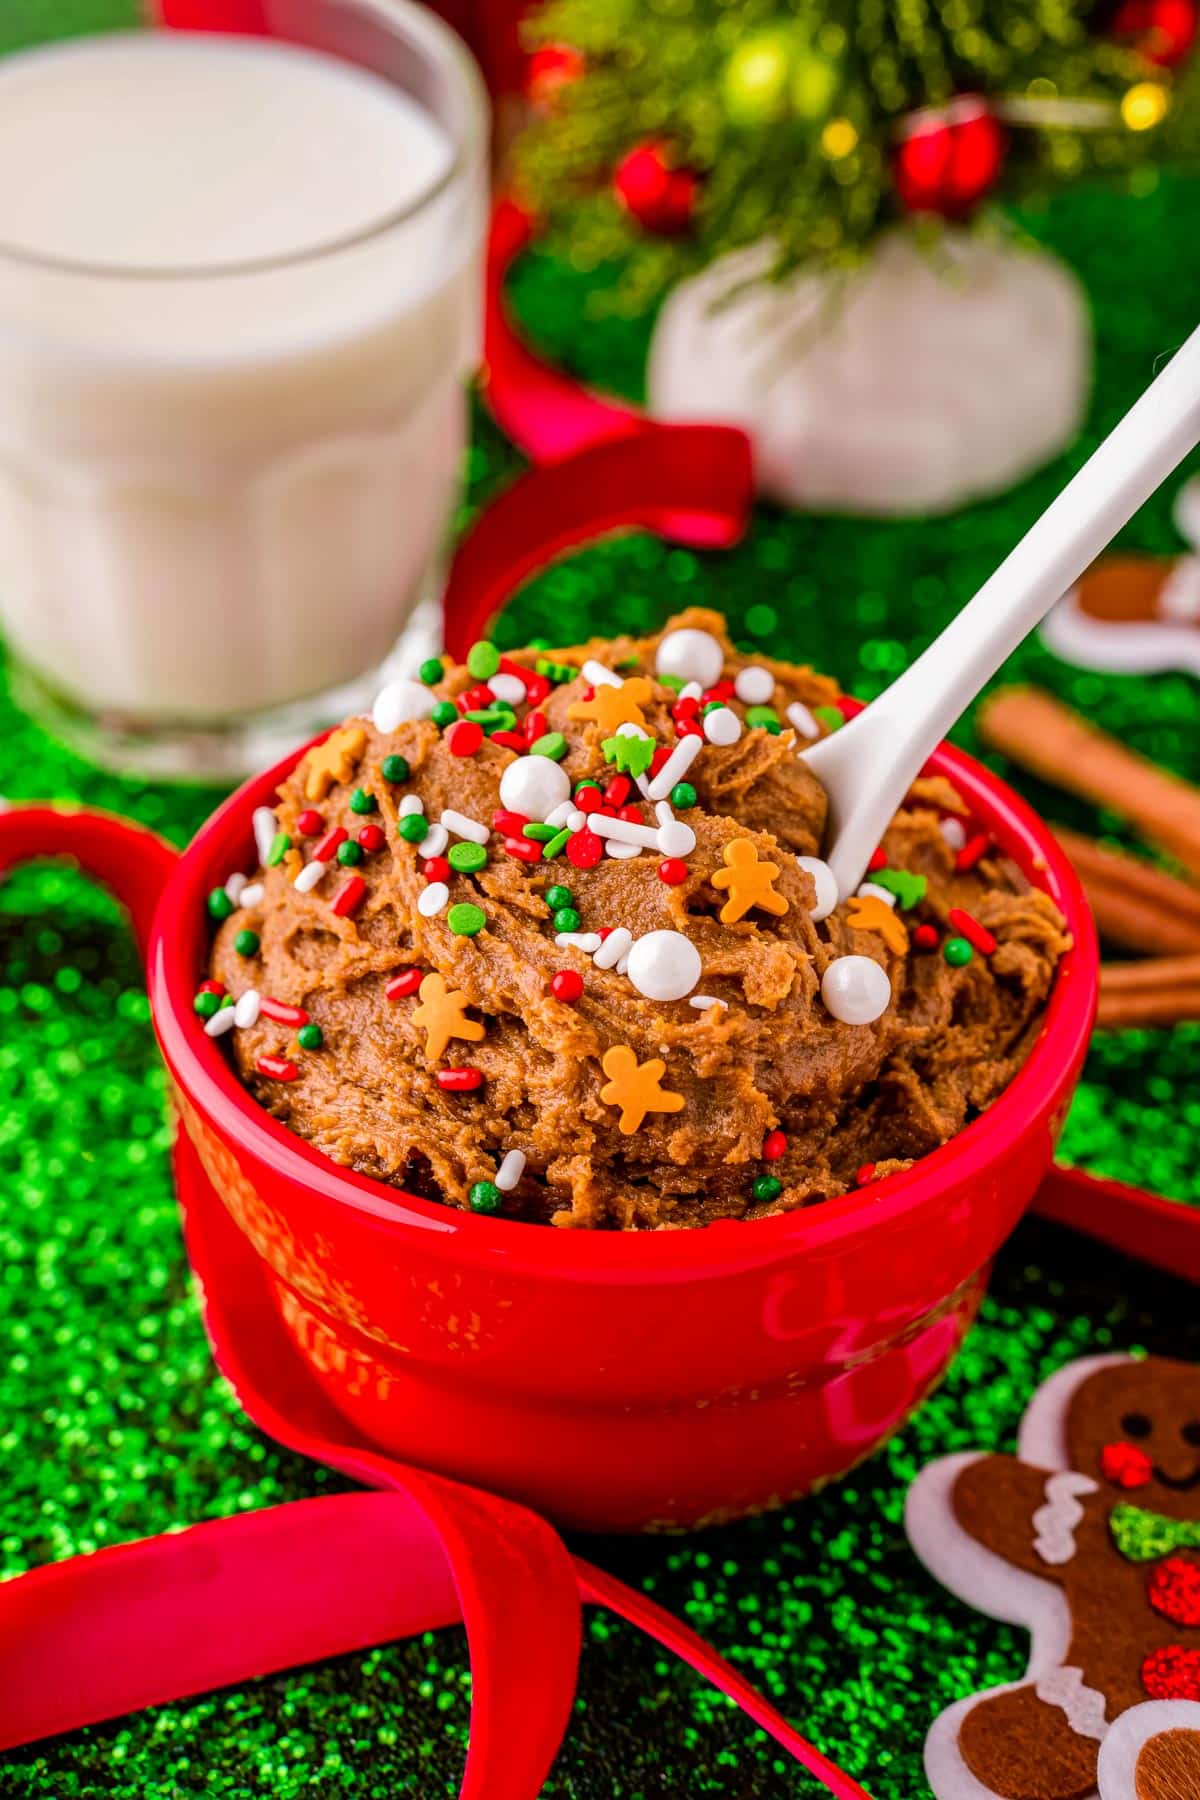 Th finished Gingerbread Edible Cookie Dough in a red bowl with a spoon.